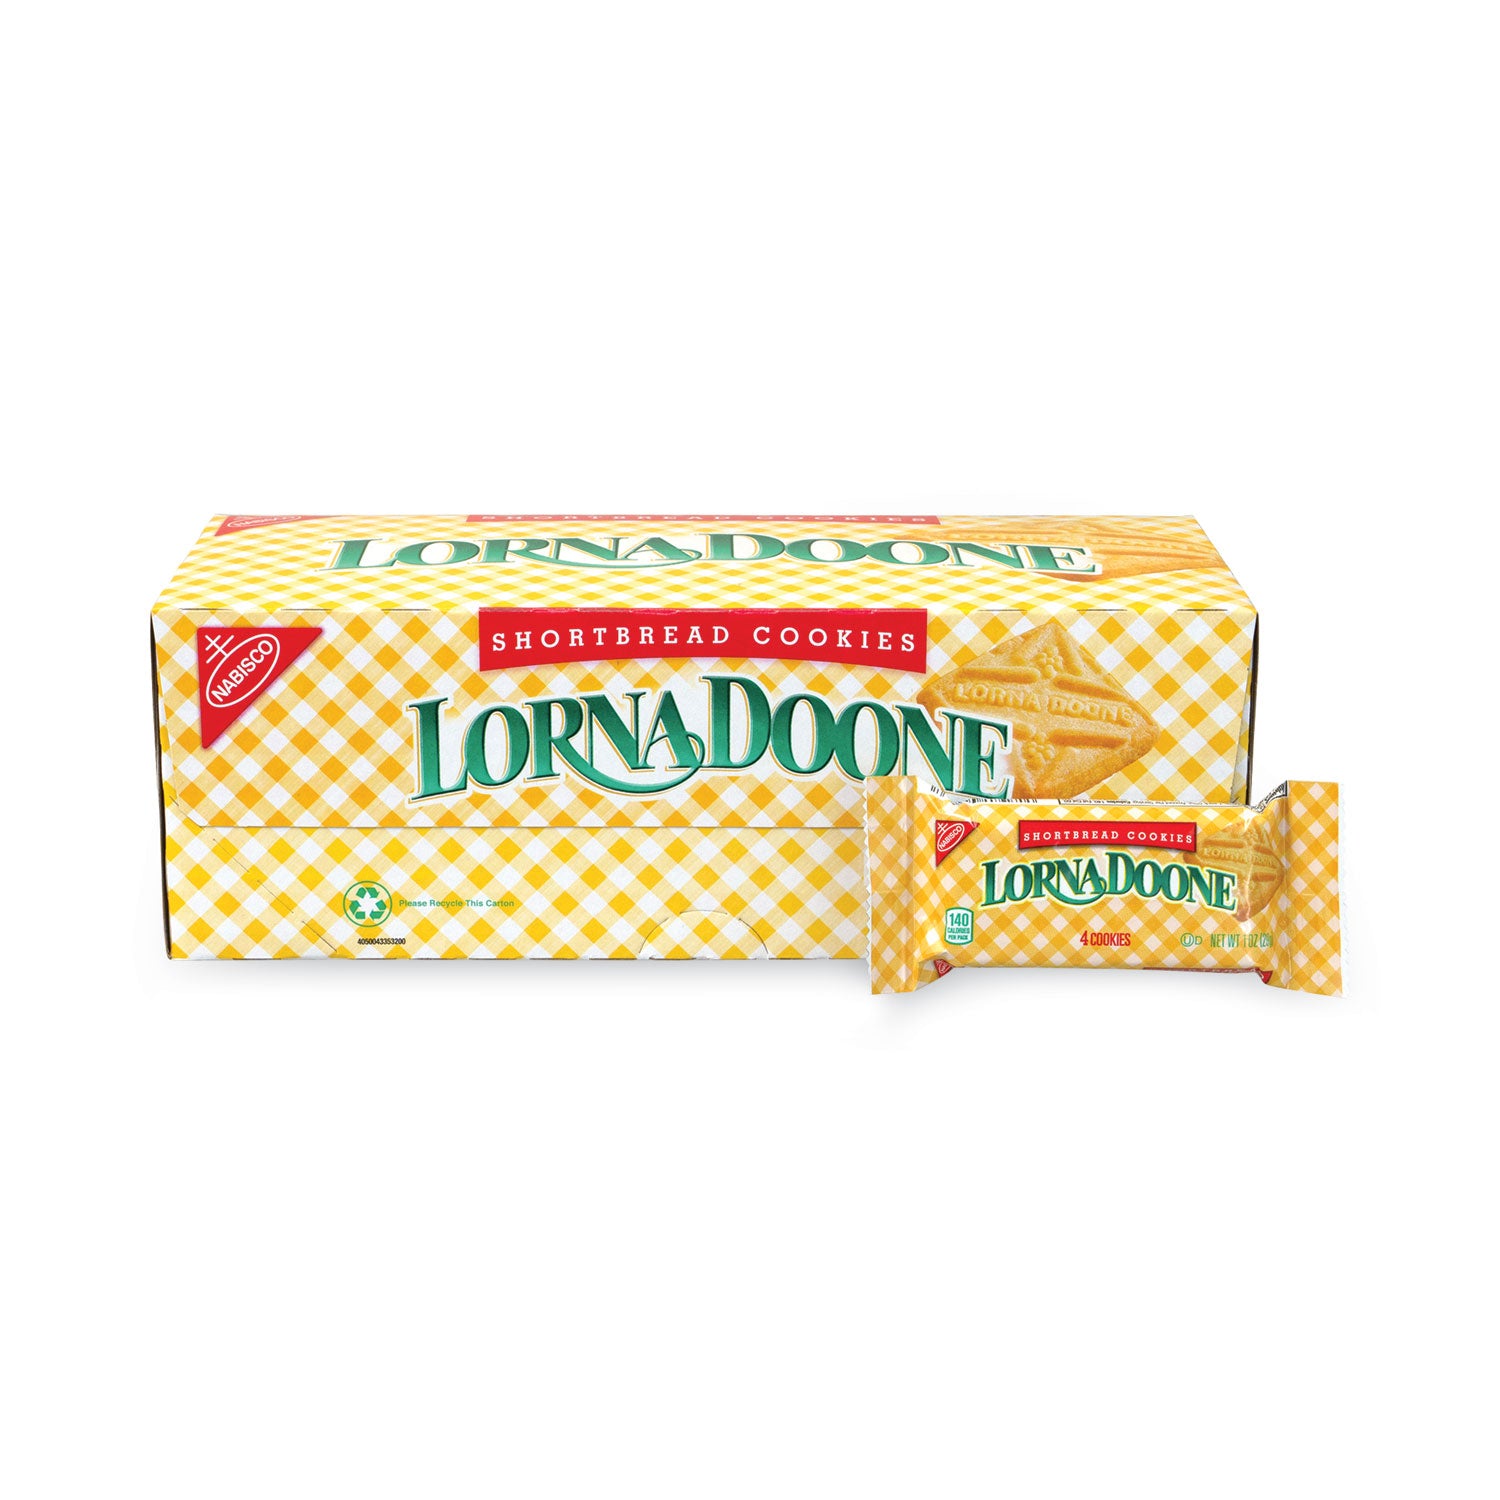 lorna-doone-shortbread-cookies-1-oz-packet-120-packets-box-4-boxes-carton-ships-in-1-3-business-days_grr30400097 - 2